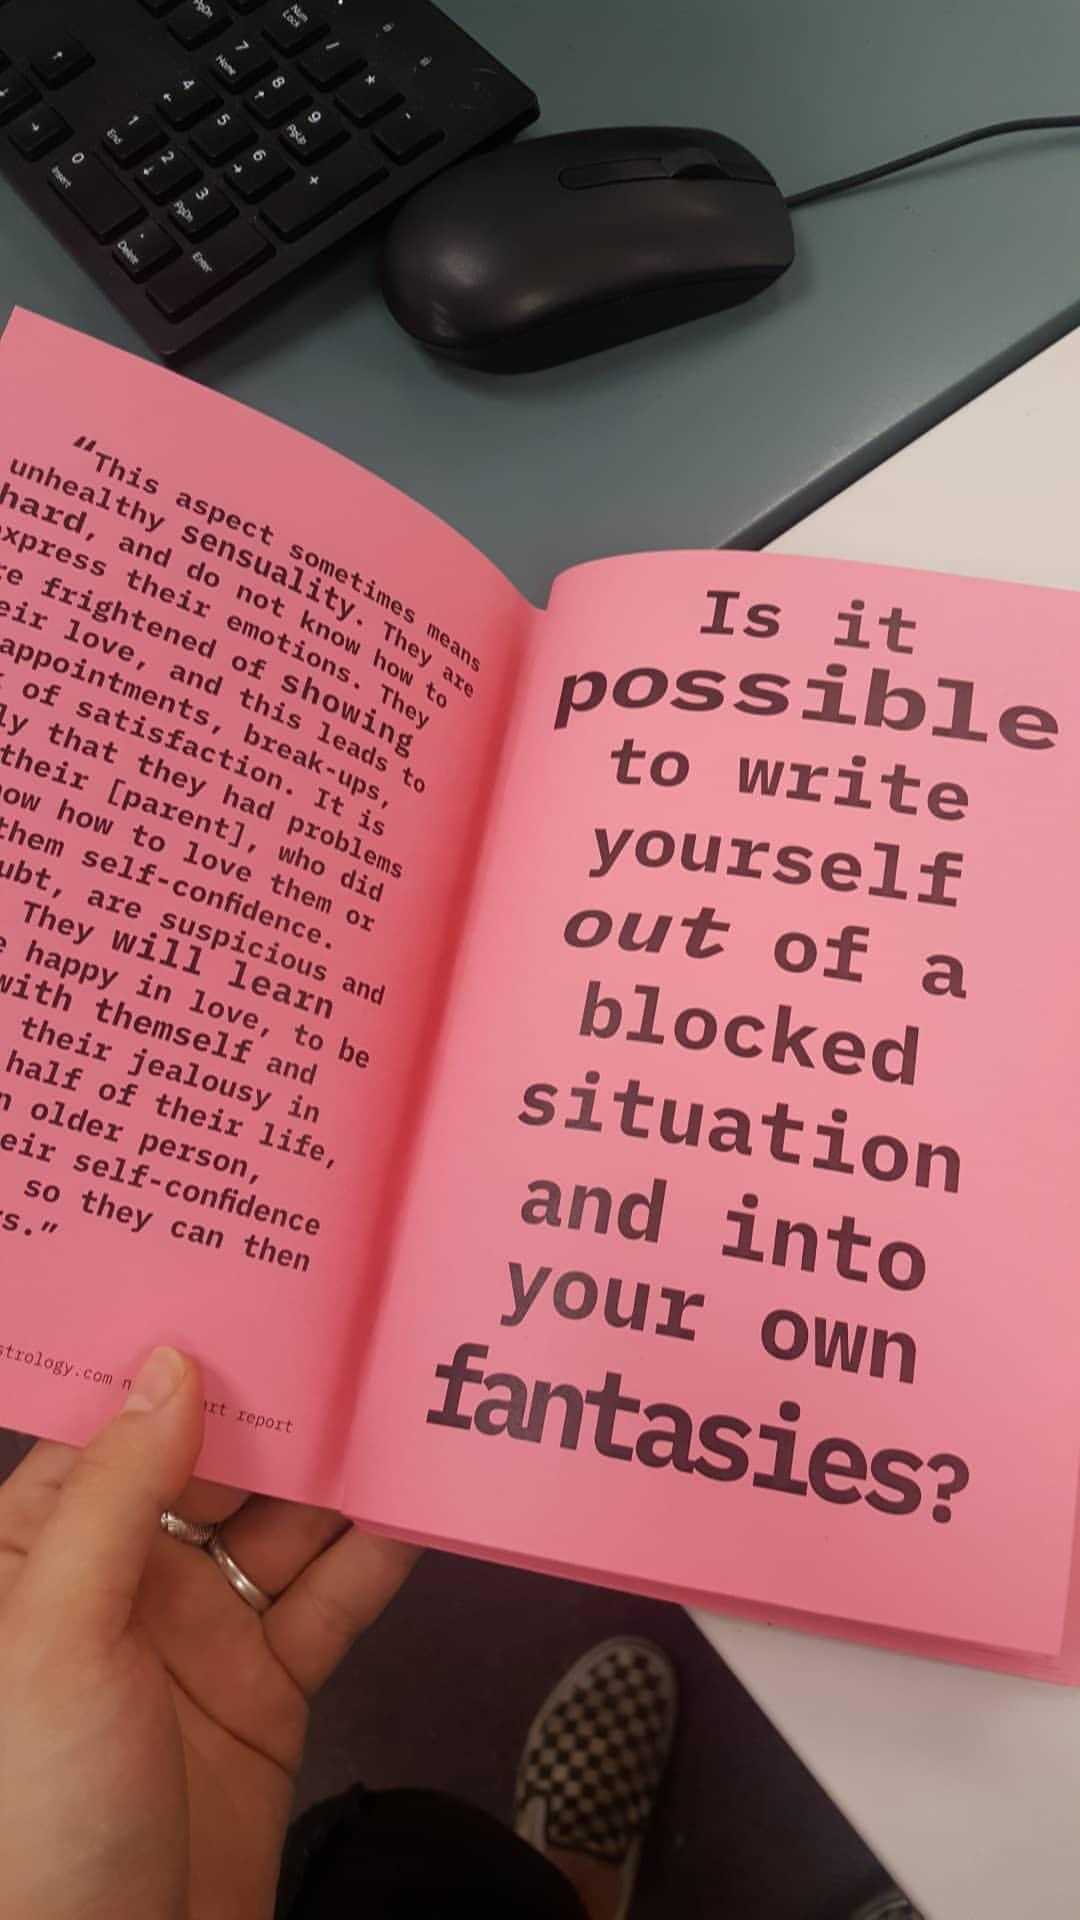 A zine printed on pink paper is open to a page that says 'is it possible to write yourself out of a blocked situation and into your own fantasies?'